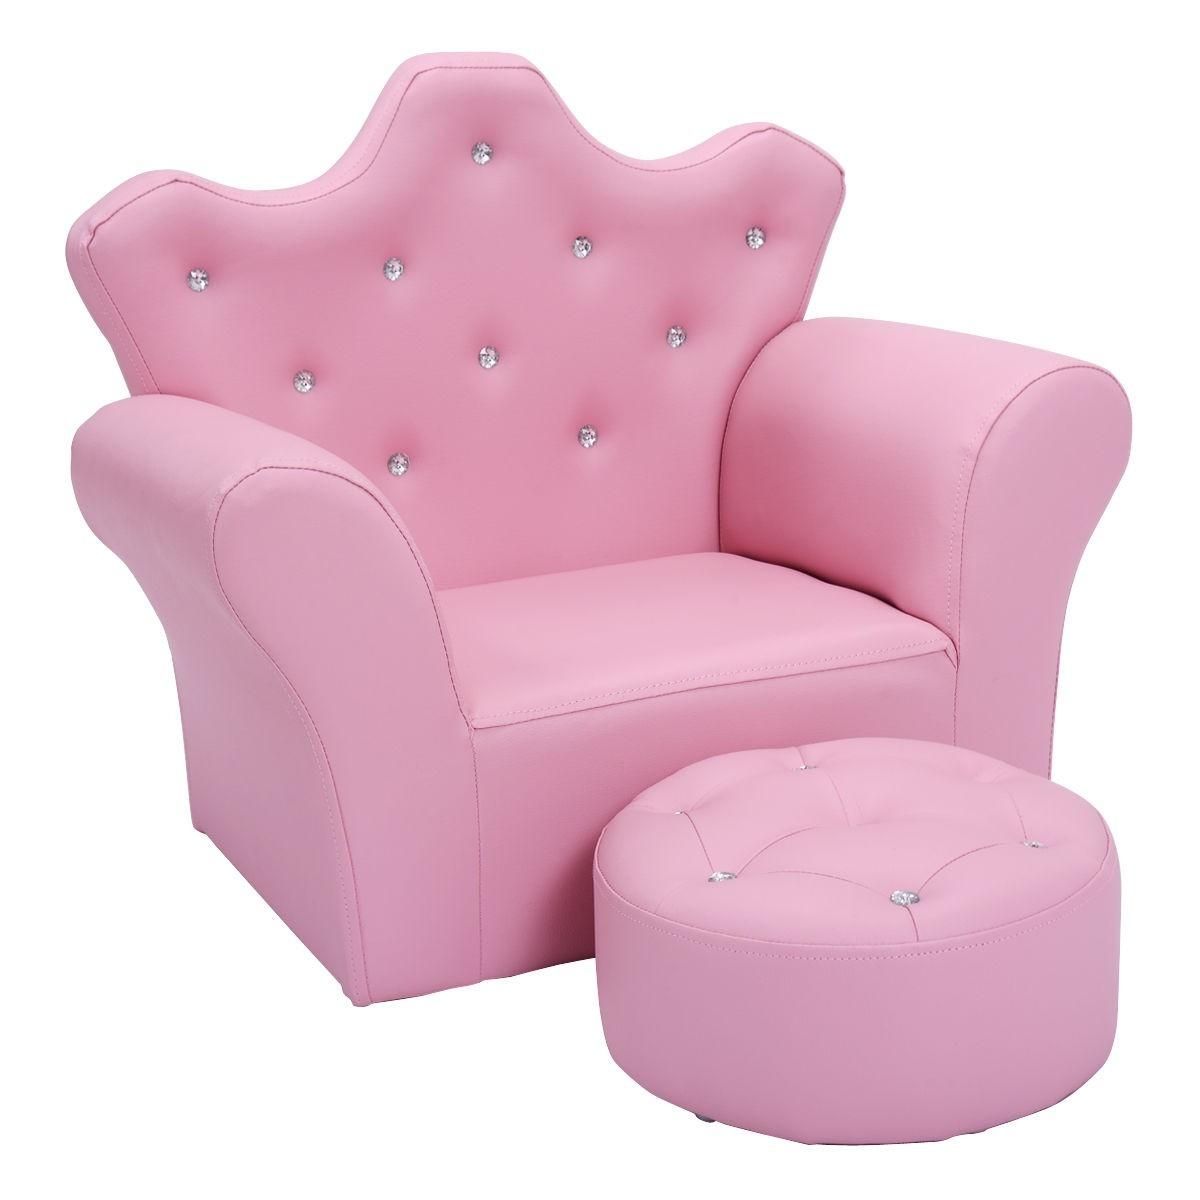 Pink Kids Sofa Armrest Couch With Ottoman – Sofas – Furniture Regarding Sofa Chair With Ottoman (View 9 of 20)